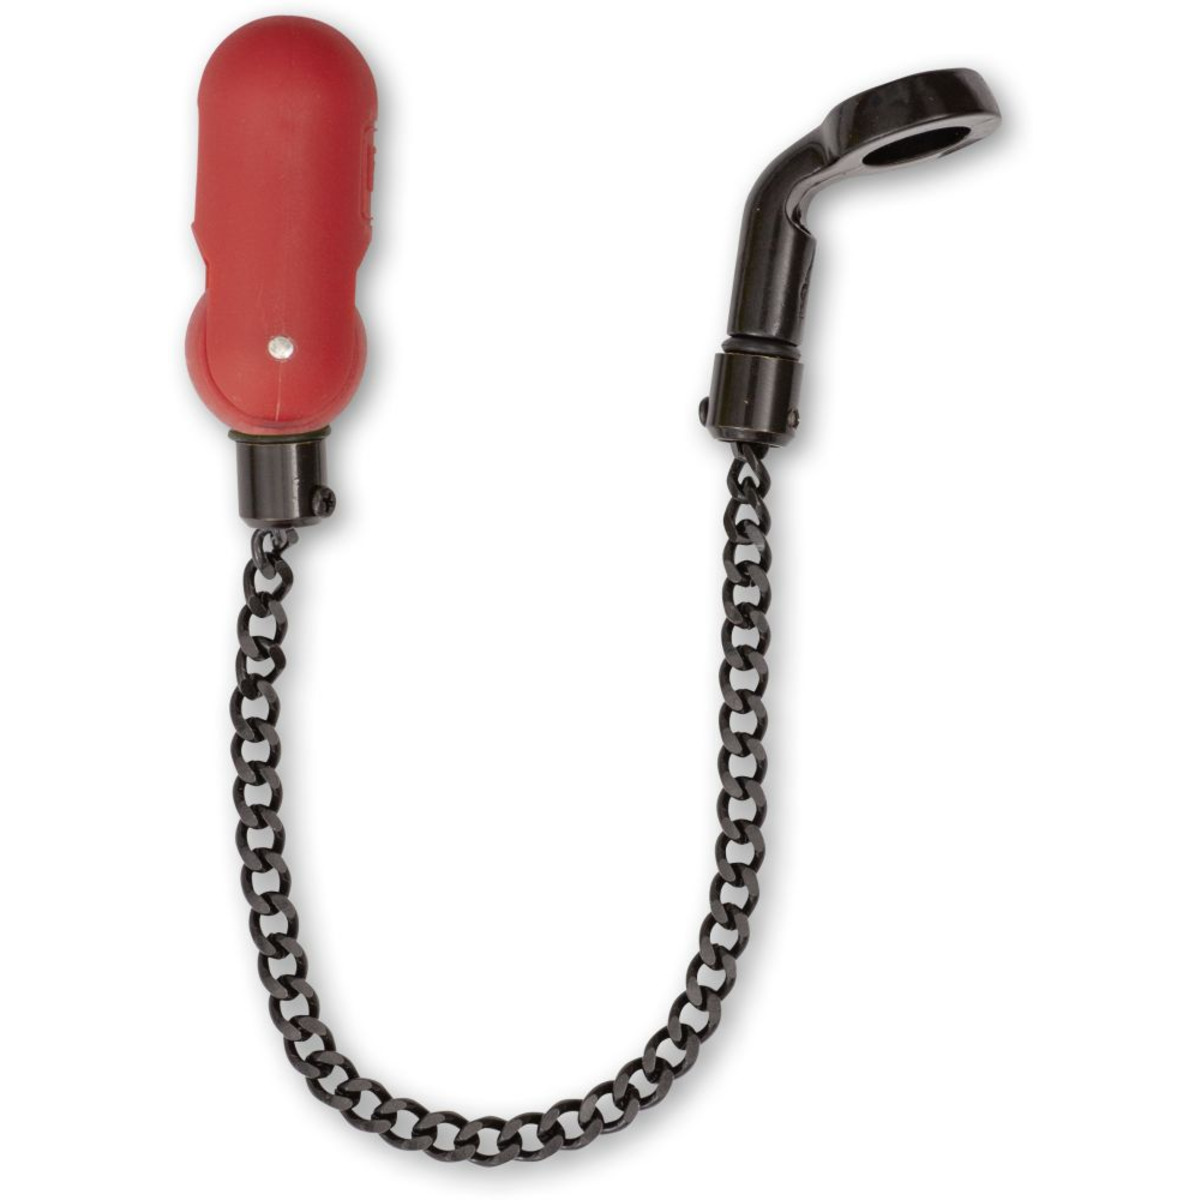 Radical Free Climber With Chain - red